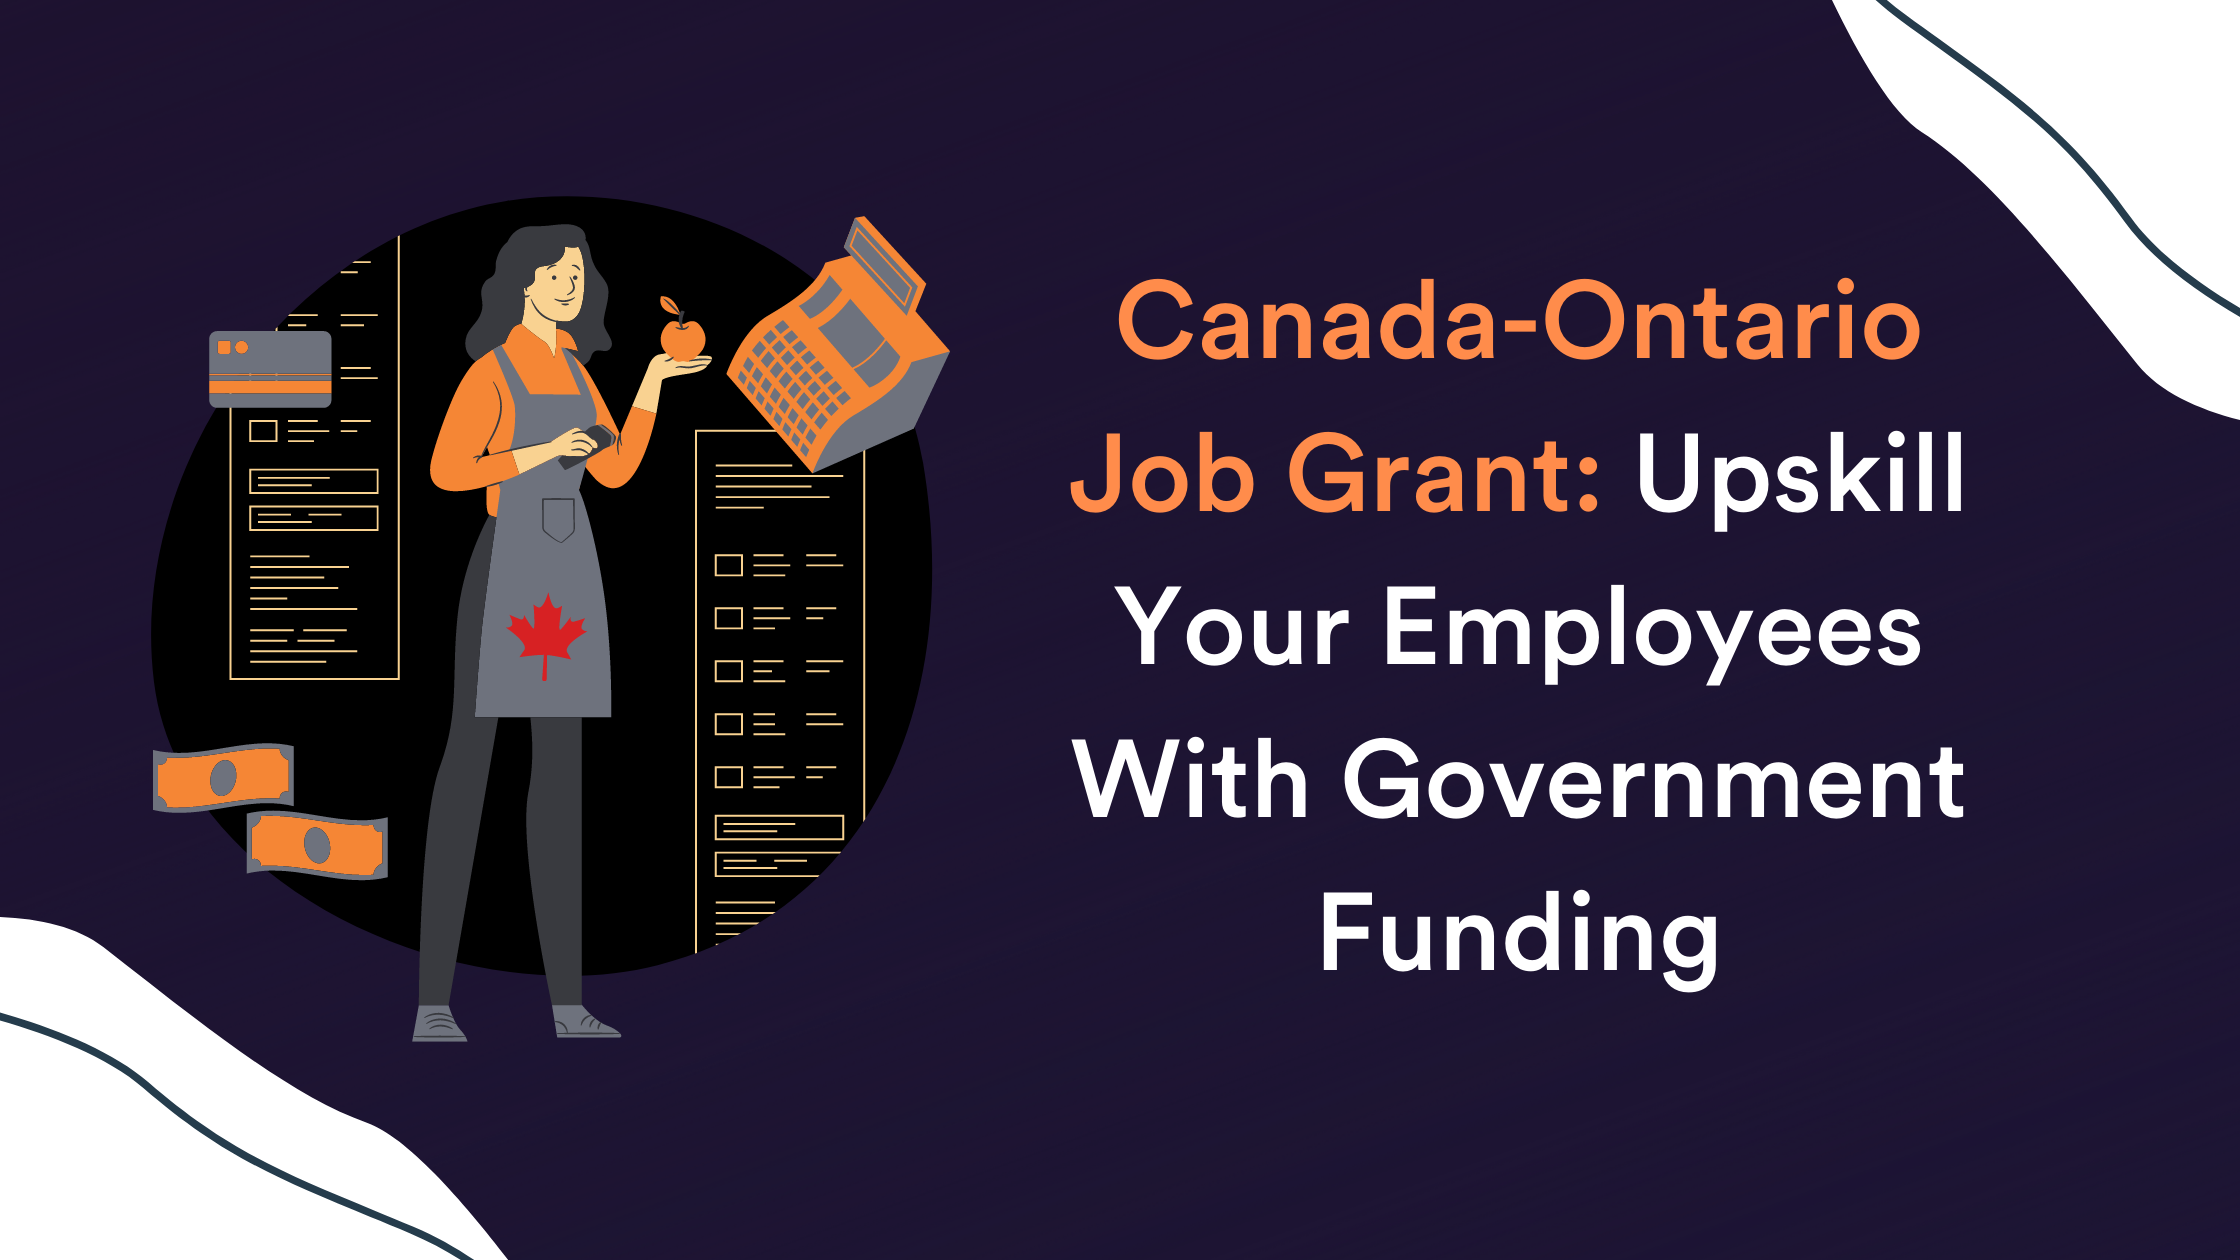 Canada-Ontario Job Grant: Upskill Your Employees With Government Funding